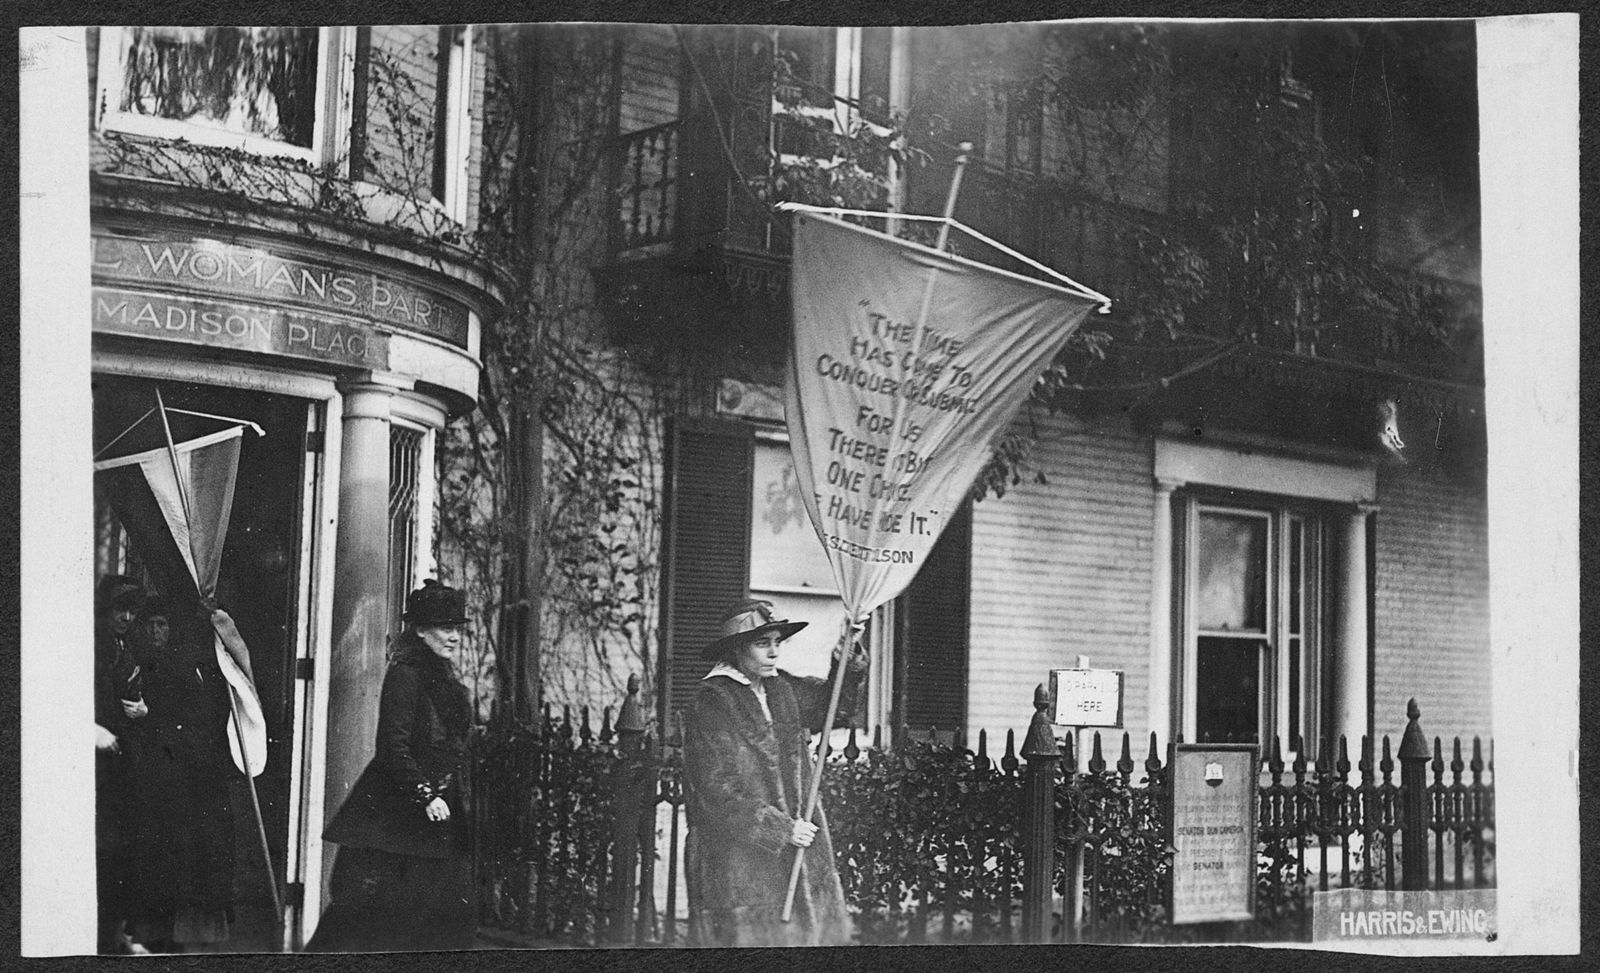 Alice Paul standing with a large banner on a picket line in 1917.